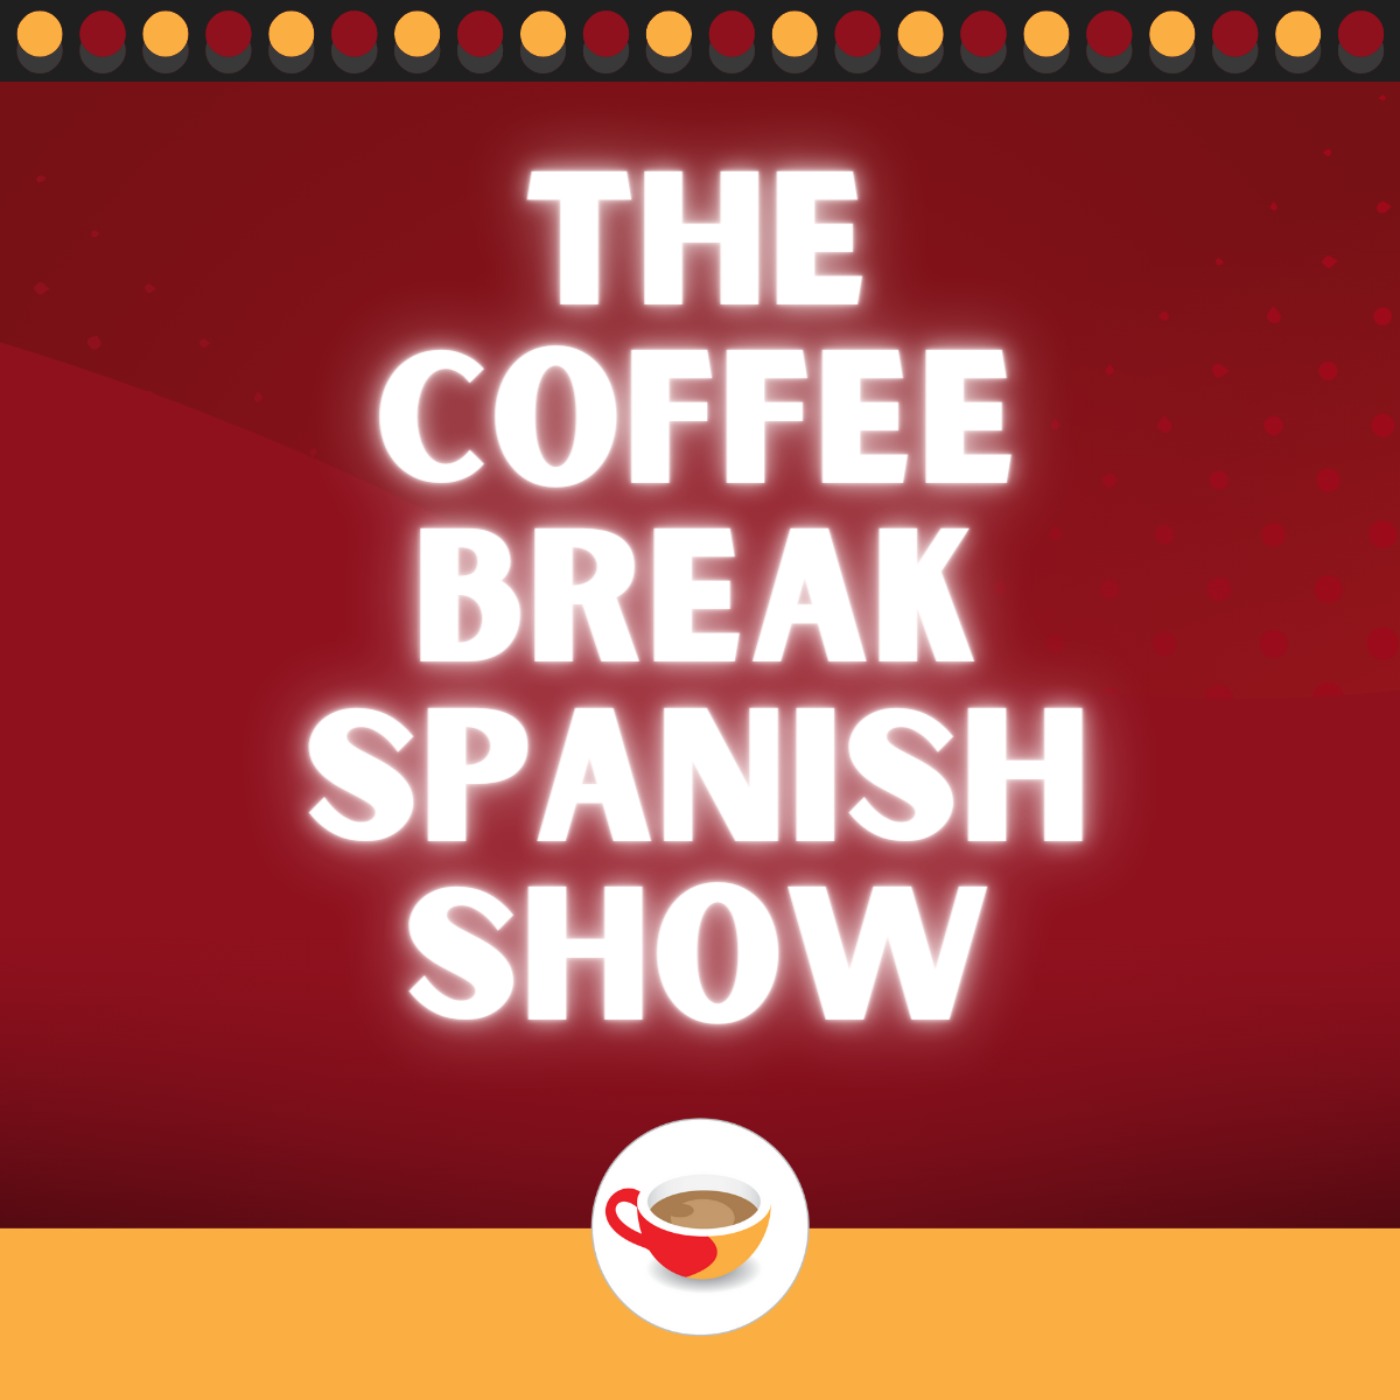 A guide to negation in Spanish | The Coffee Break Spanish Show 1.09